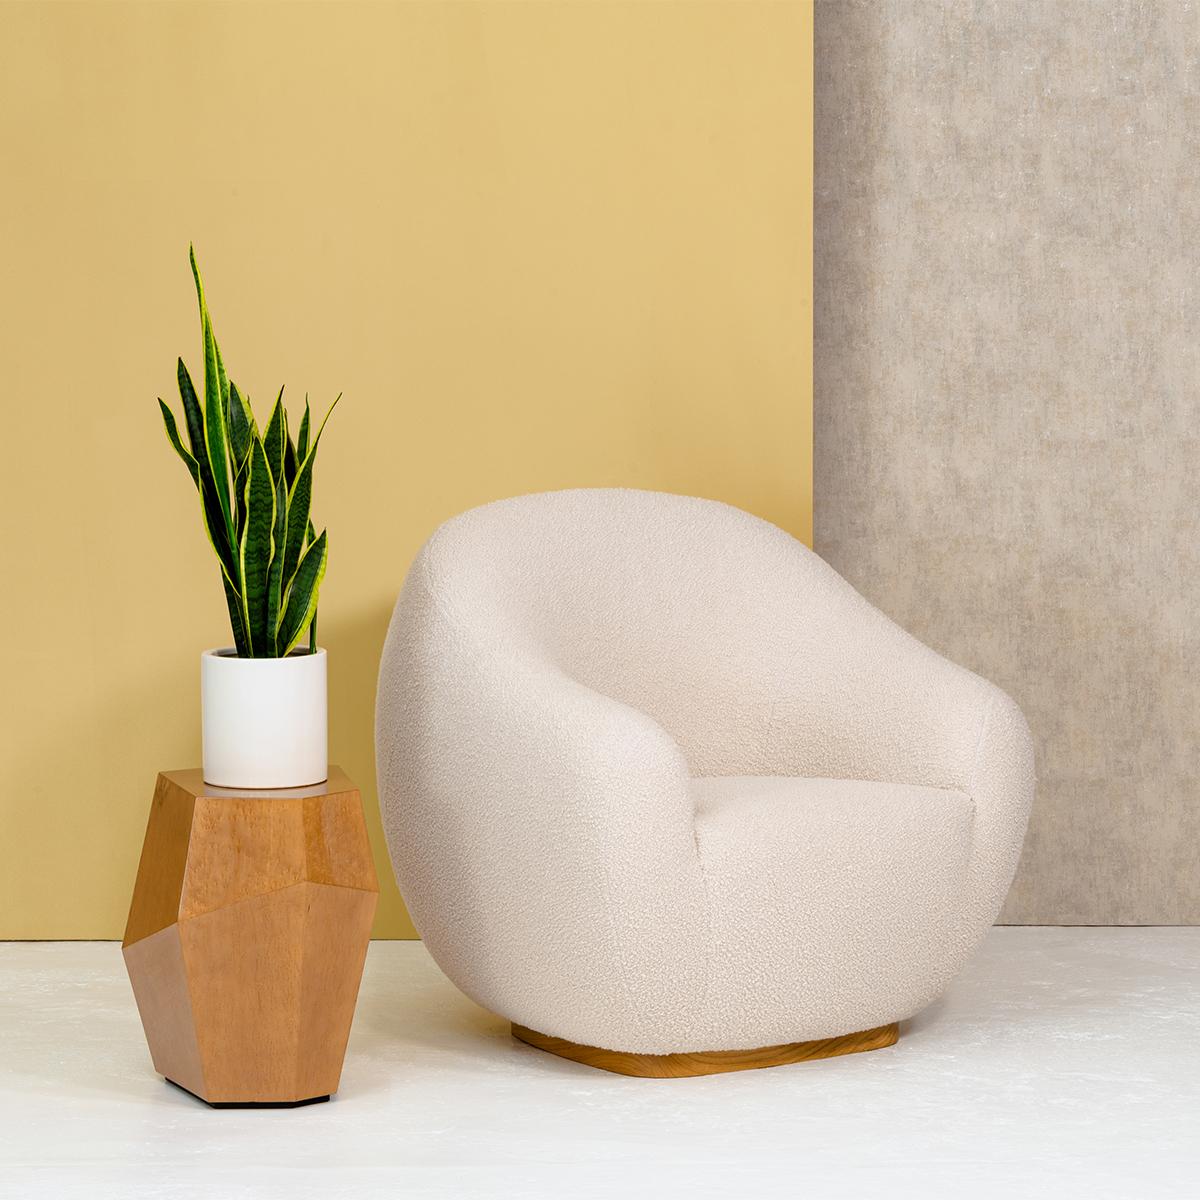 The rounded lines of this early 1950s style armchair are influenced by the 